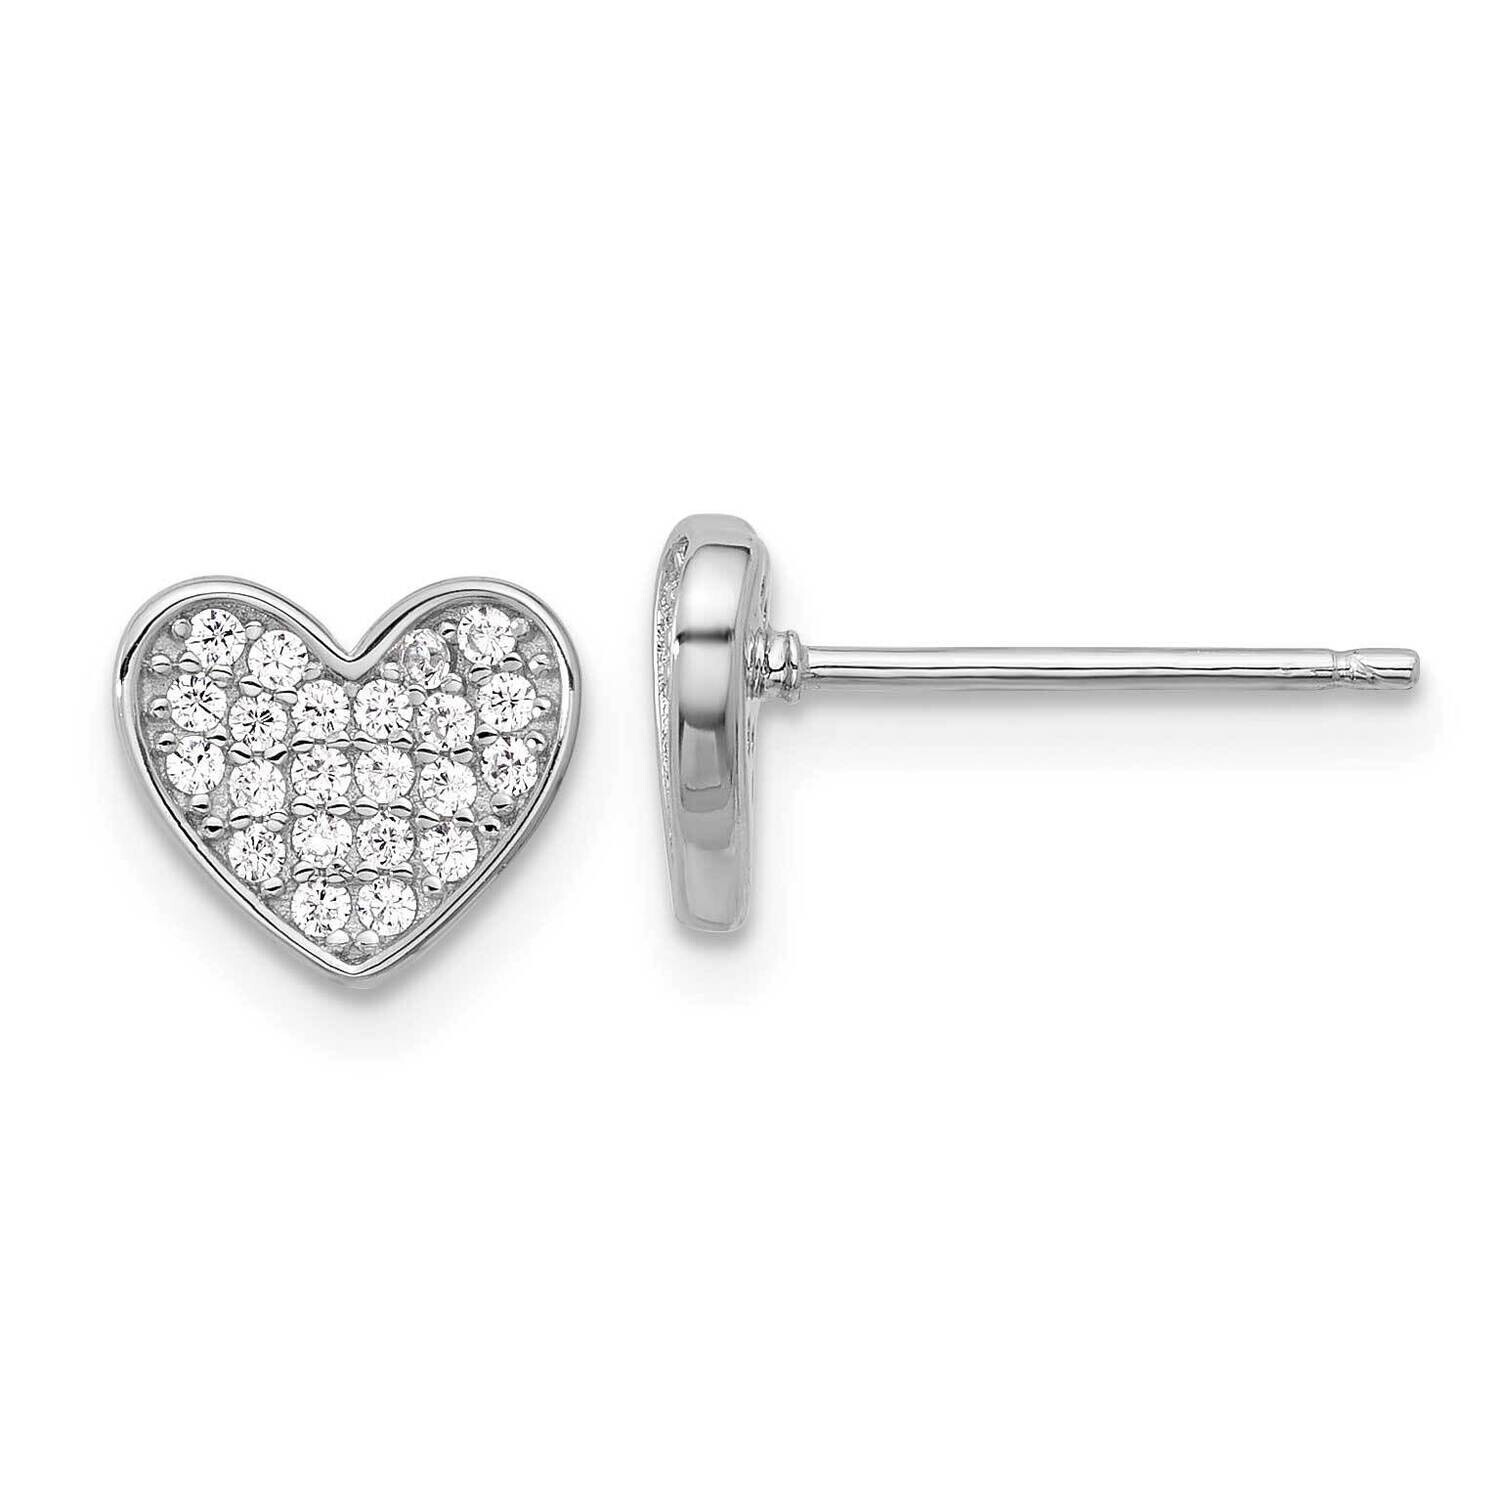 Pavc CZ Heart Post Earrings Sterling Silver Rhodium-Plated QE17510